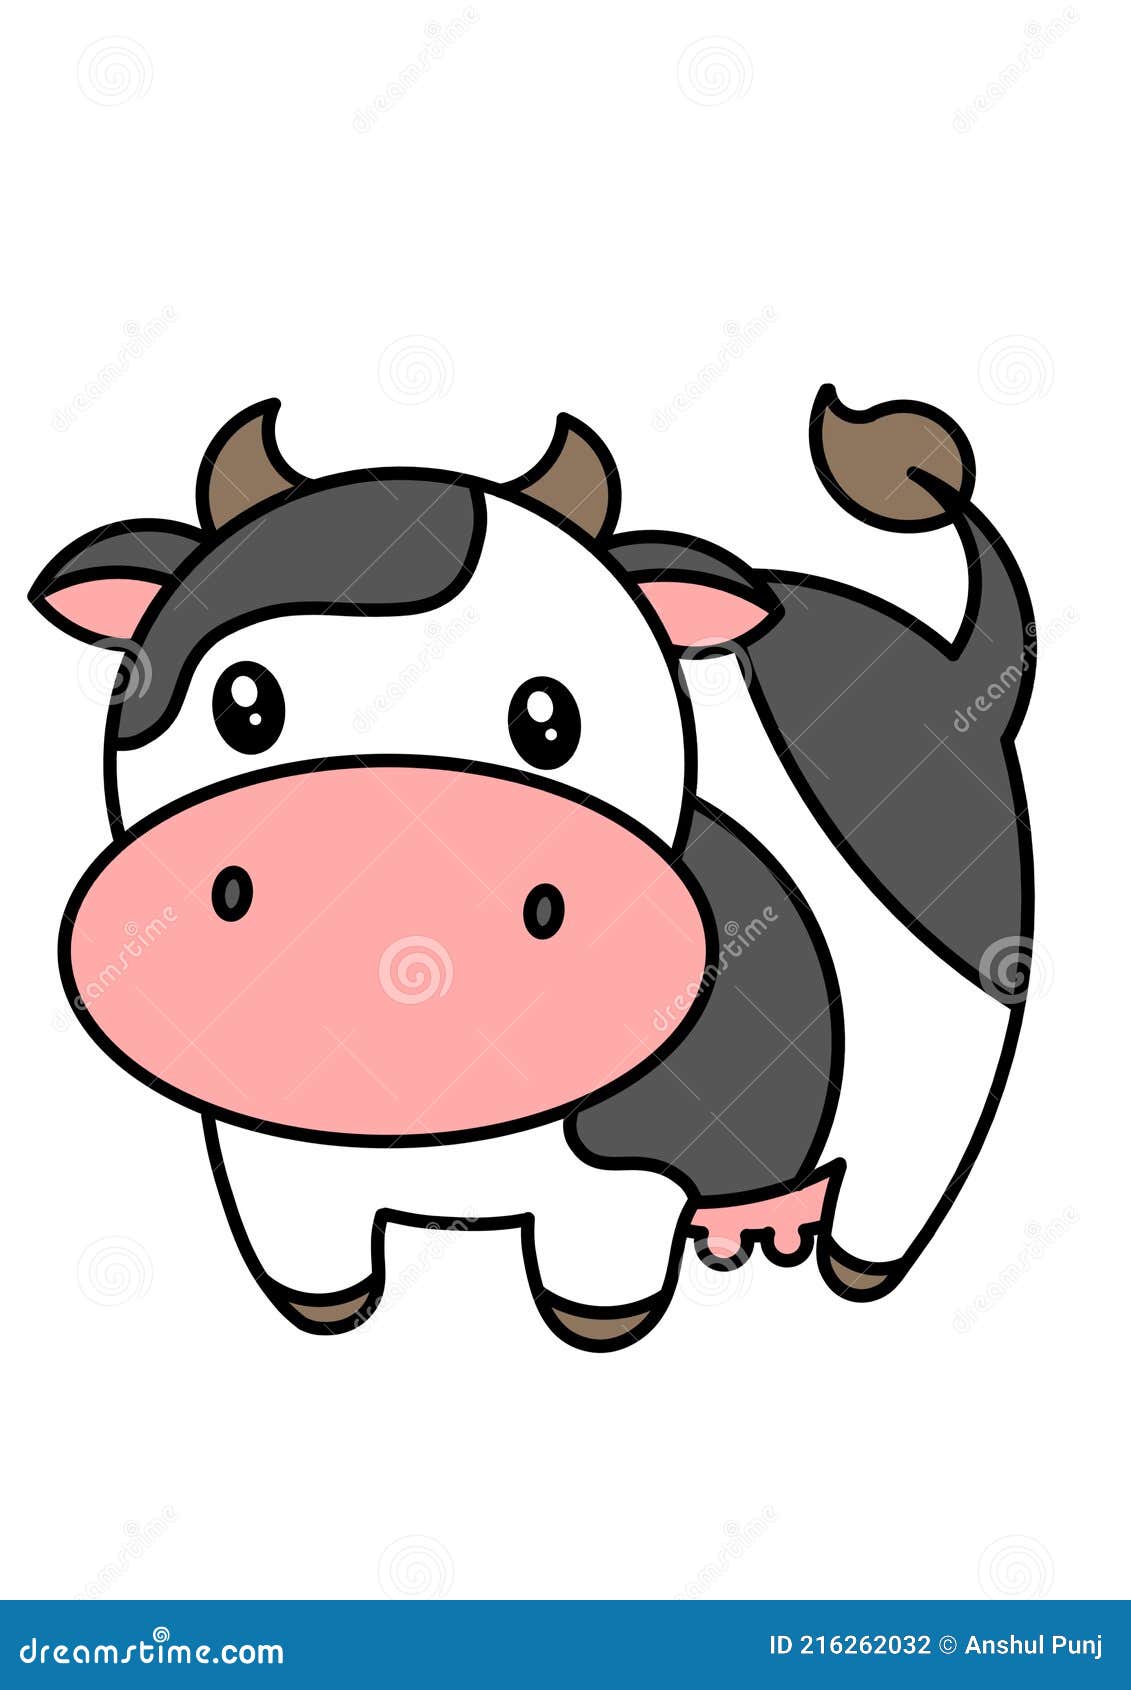 25 Easy Cow Drawing Ideas  How to Draw a Cow  Blitsy